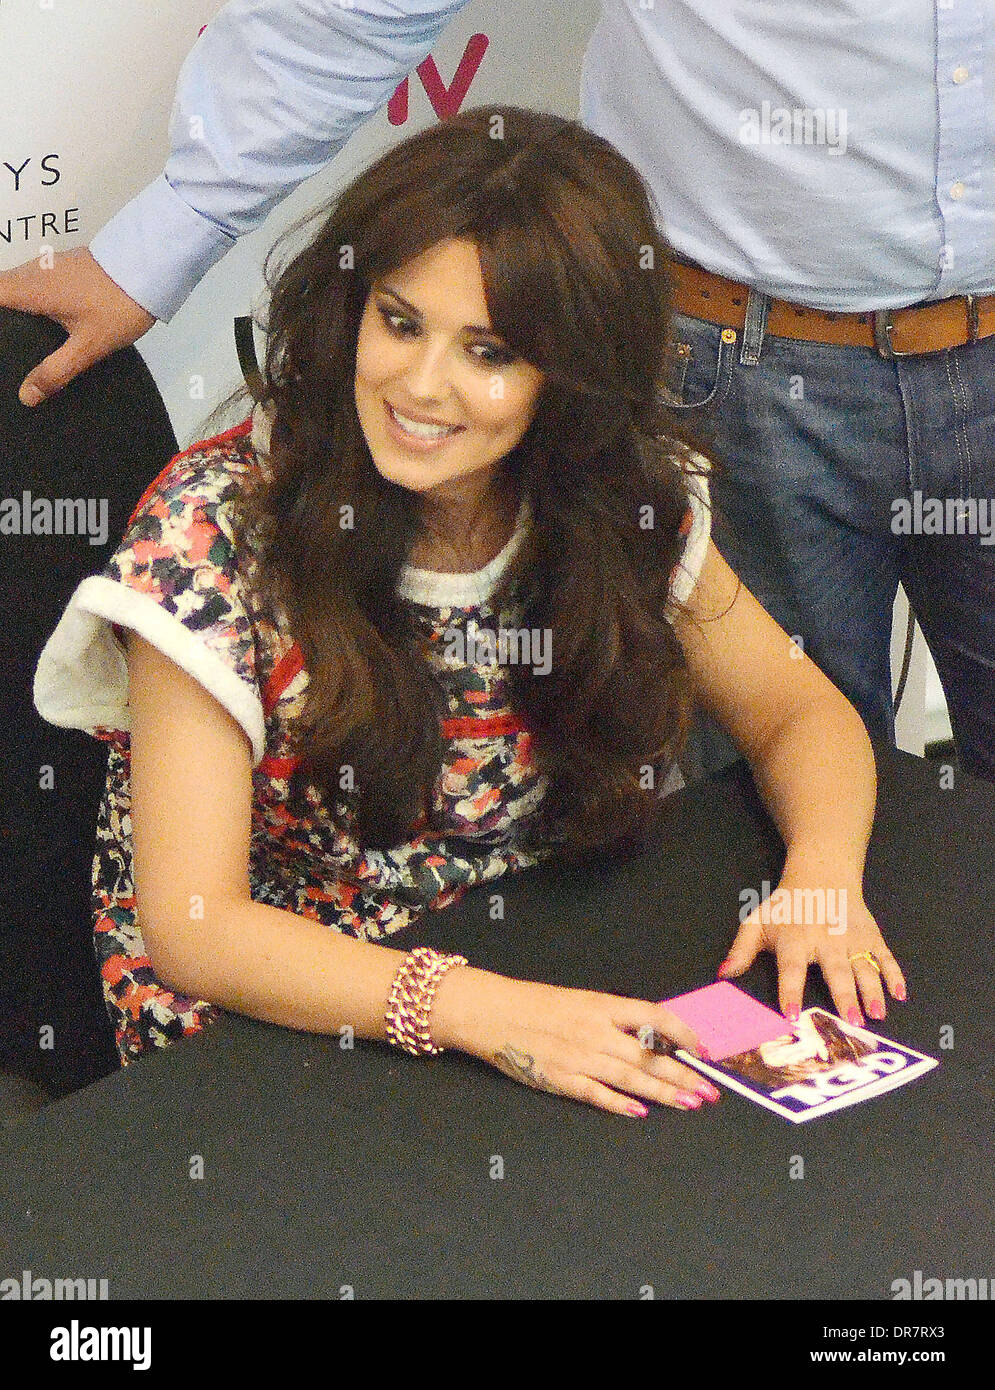 Cheryl Cole at an album signing at HMV Whiteleys Shopping Centre, Bayswater London, England - 18.06.12 Stock Photo